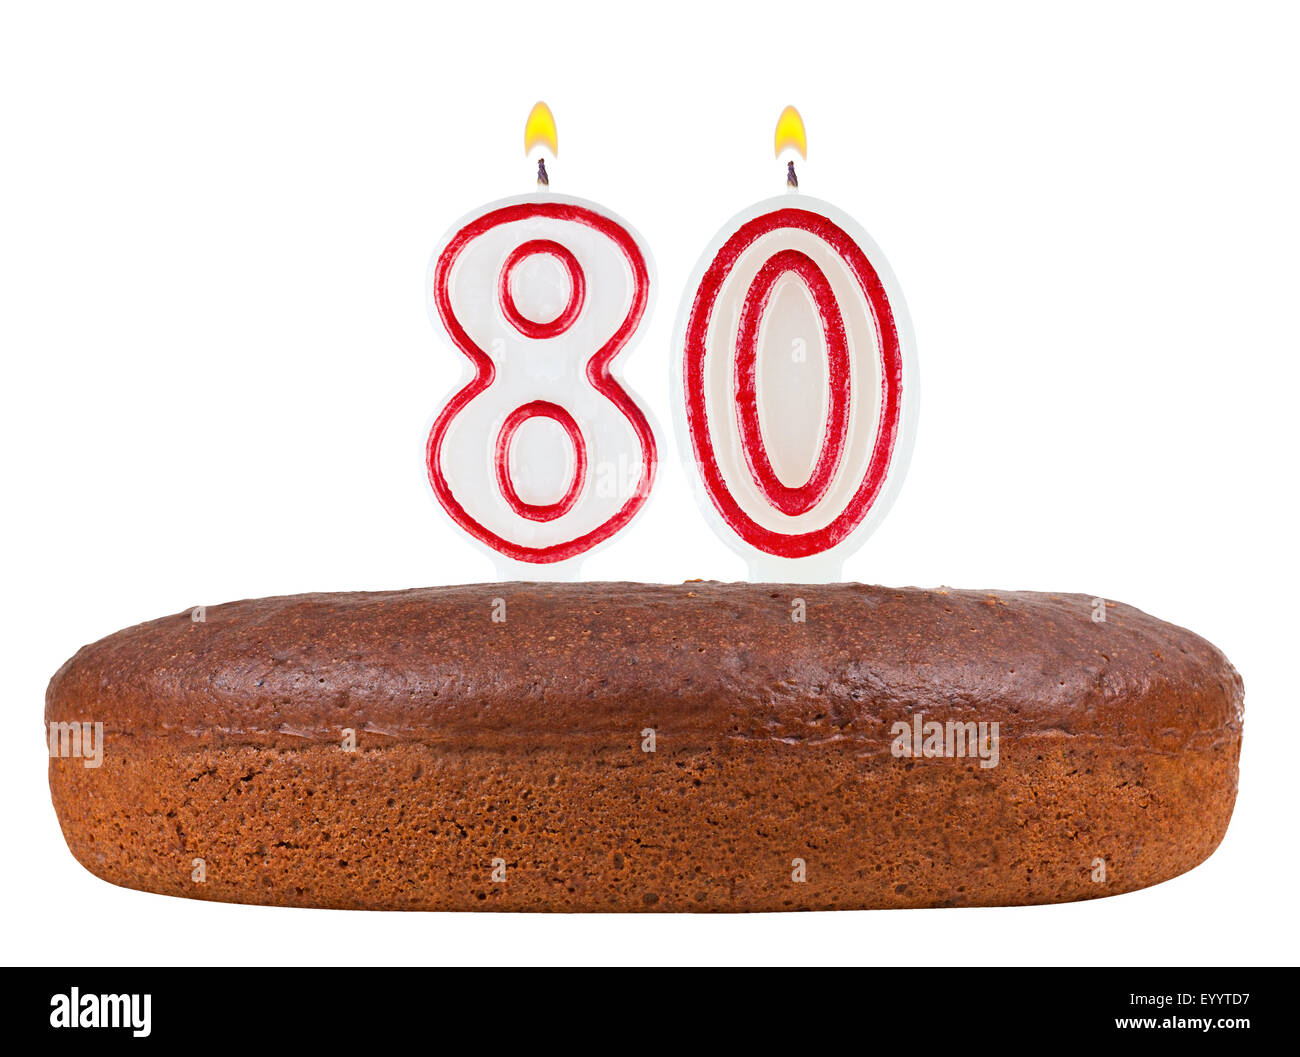 birthday cake with candles number 80 isolated on white background Stock Photo